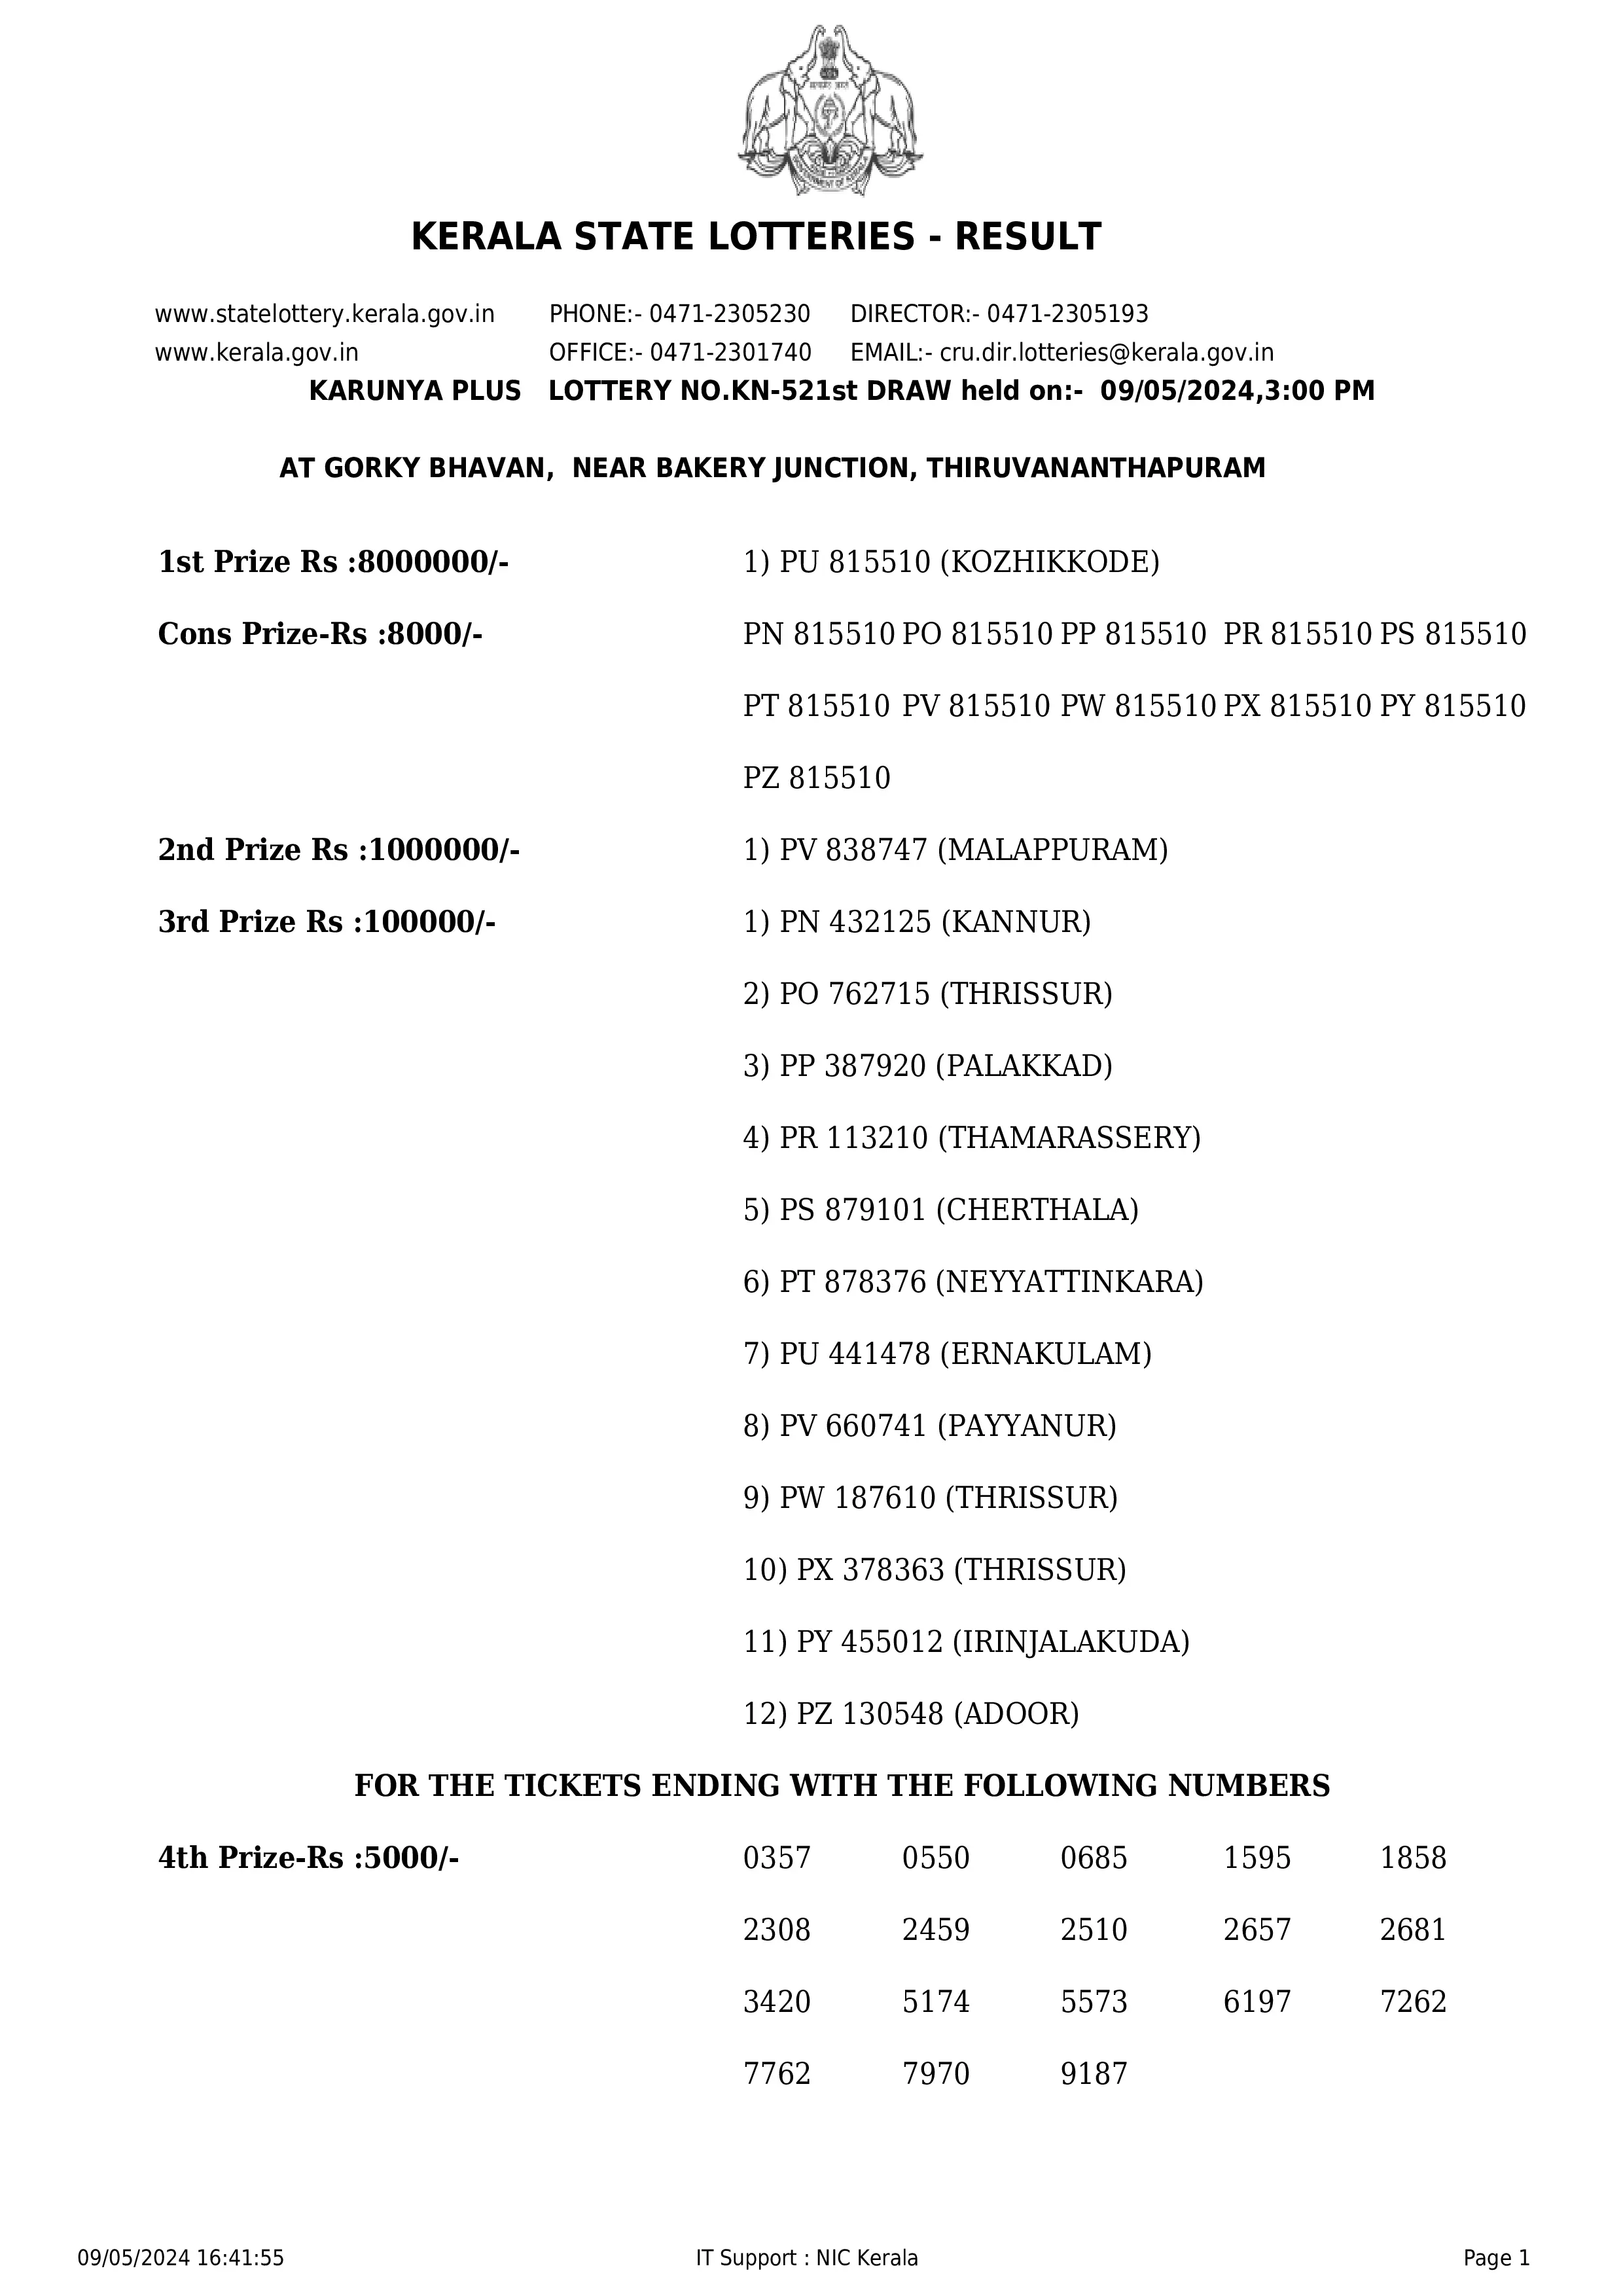 KARUNYA PLUS LOTTERY RESULT TODAY